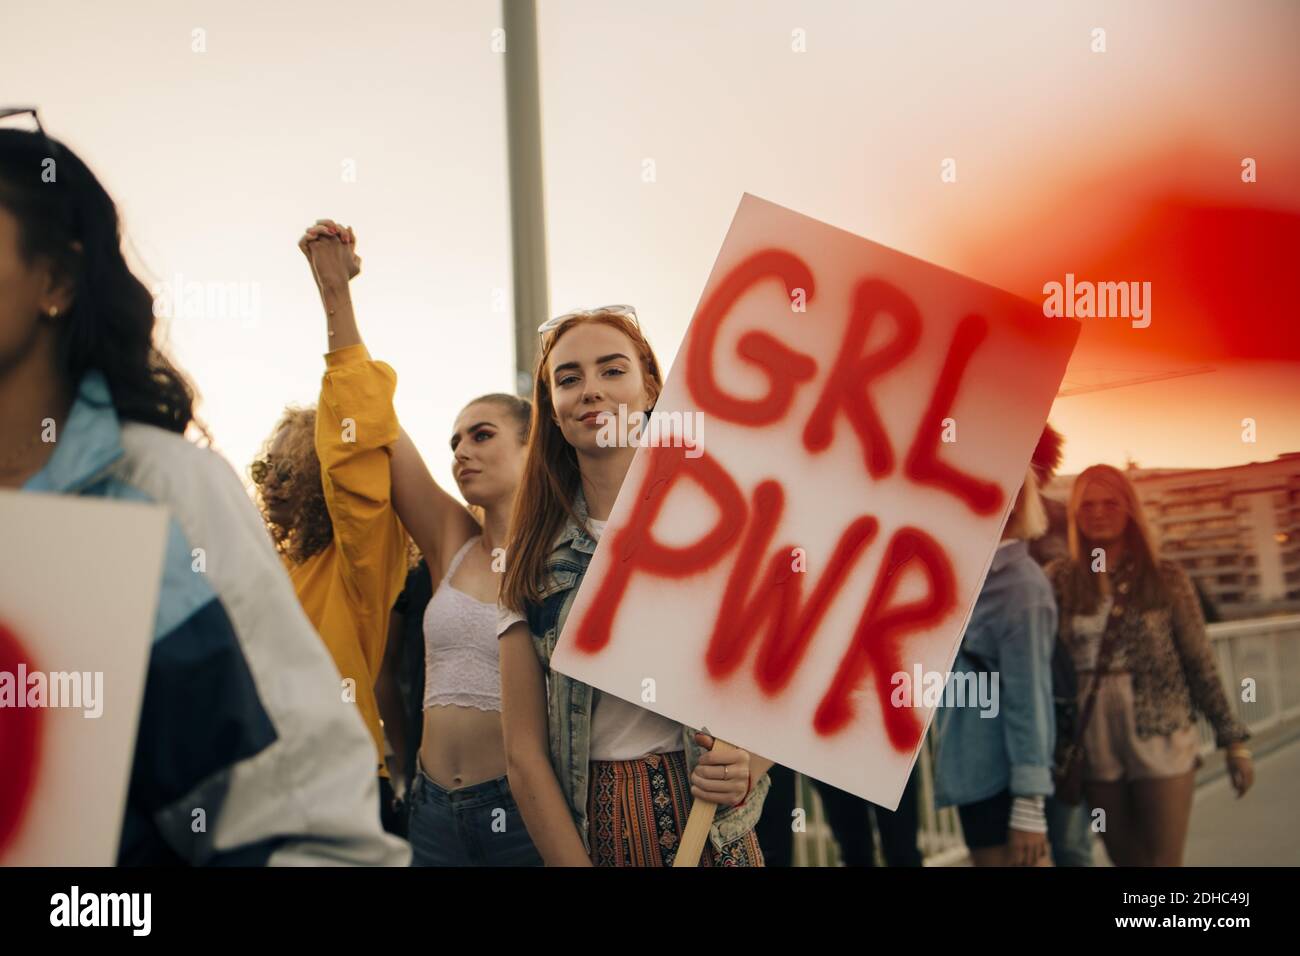 Portrait of women protesting with friends for human rights in city against sky Stock Photo